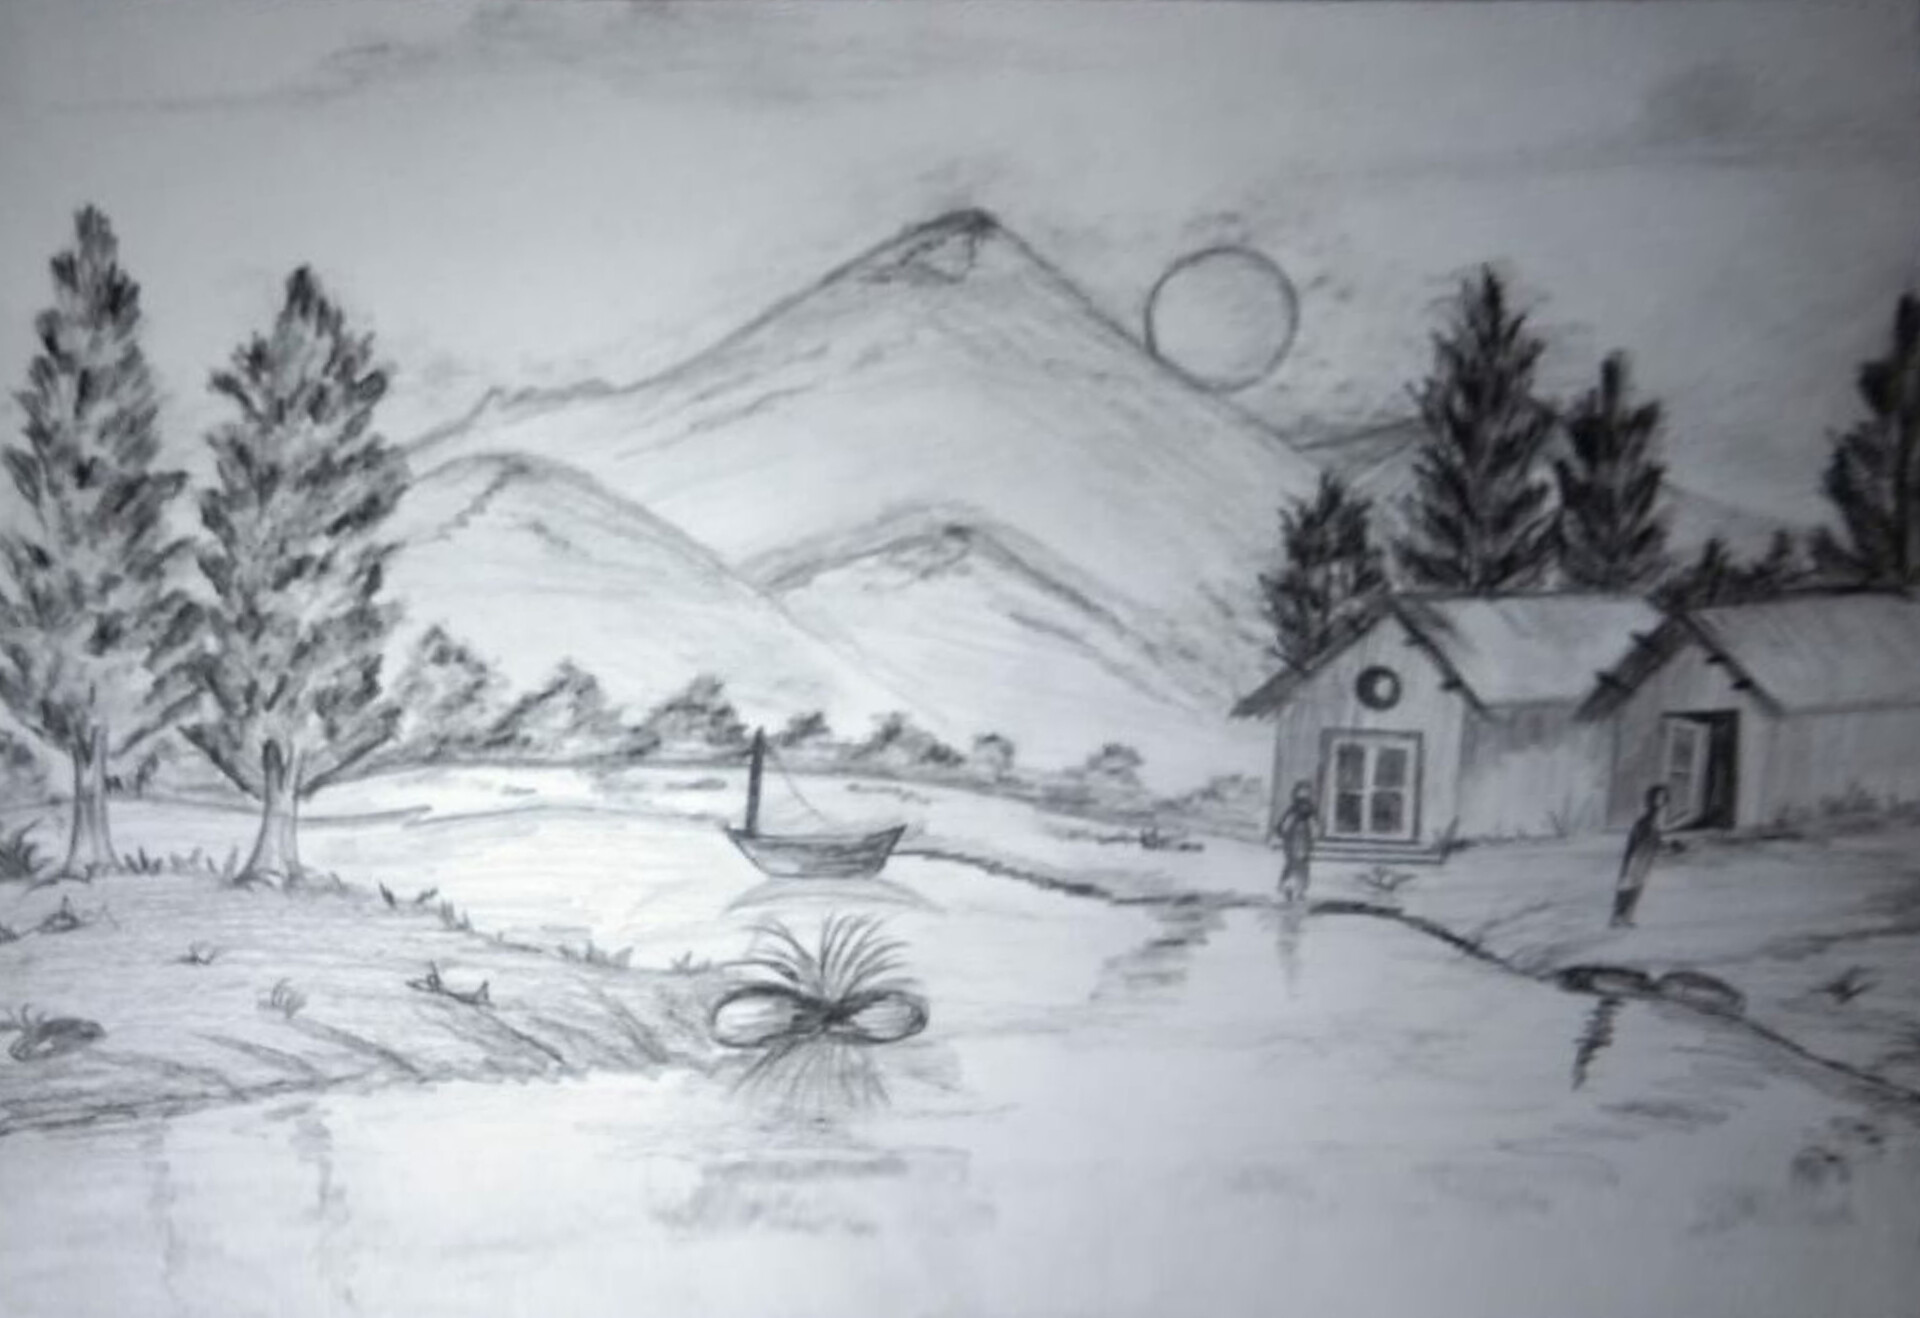 easy pencil shading scenery drawing for kids,landscape scenery drawing,village  scenery drawing | Easy scenery drawing, Drawing scenery, Landscape drawing  easy